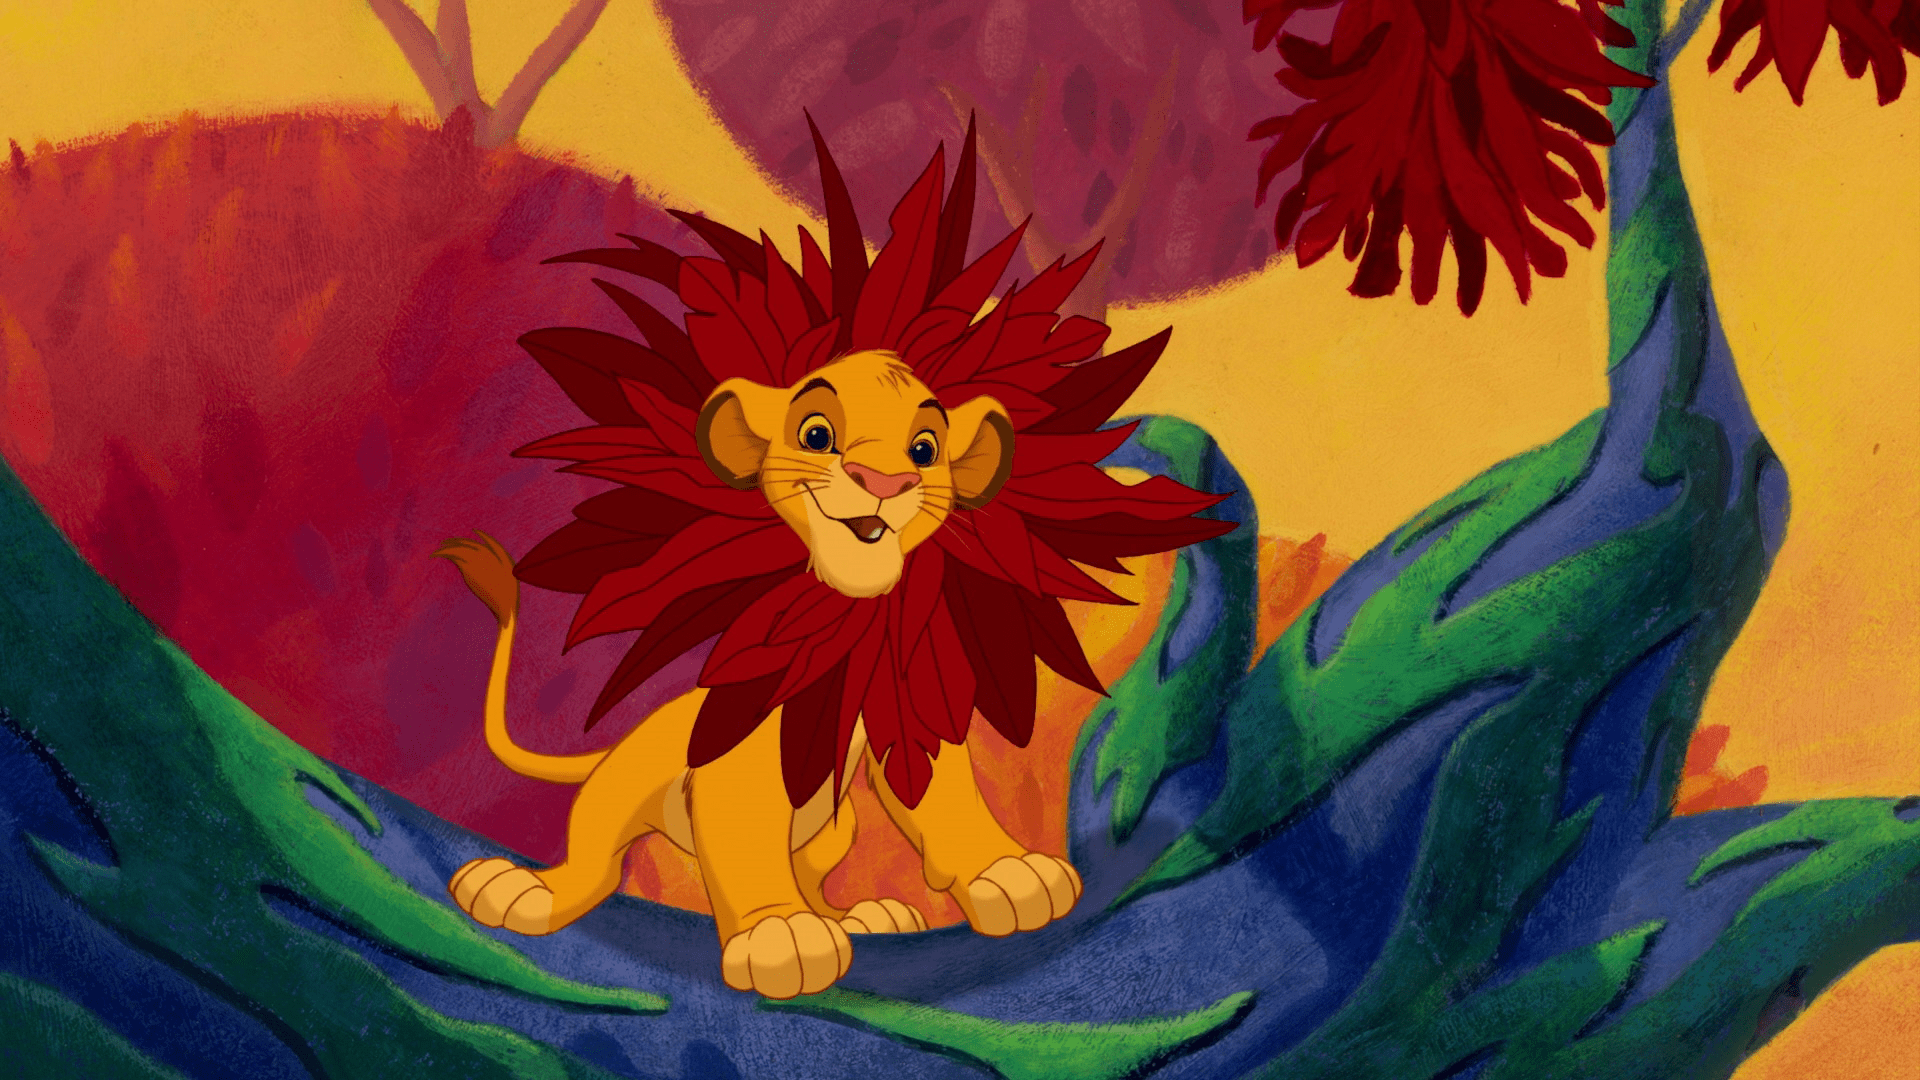 Lion King Movie Review